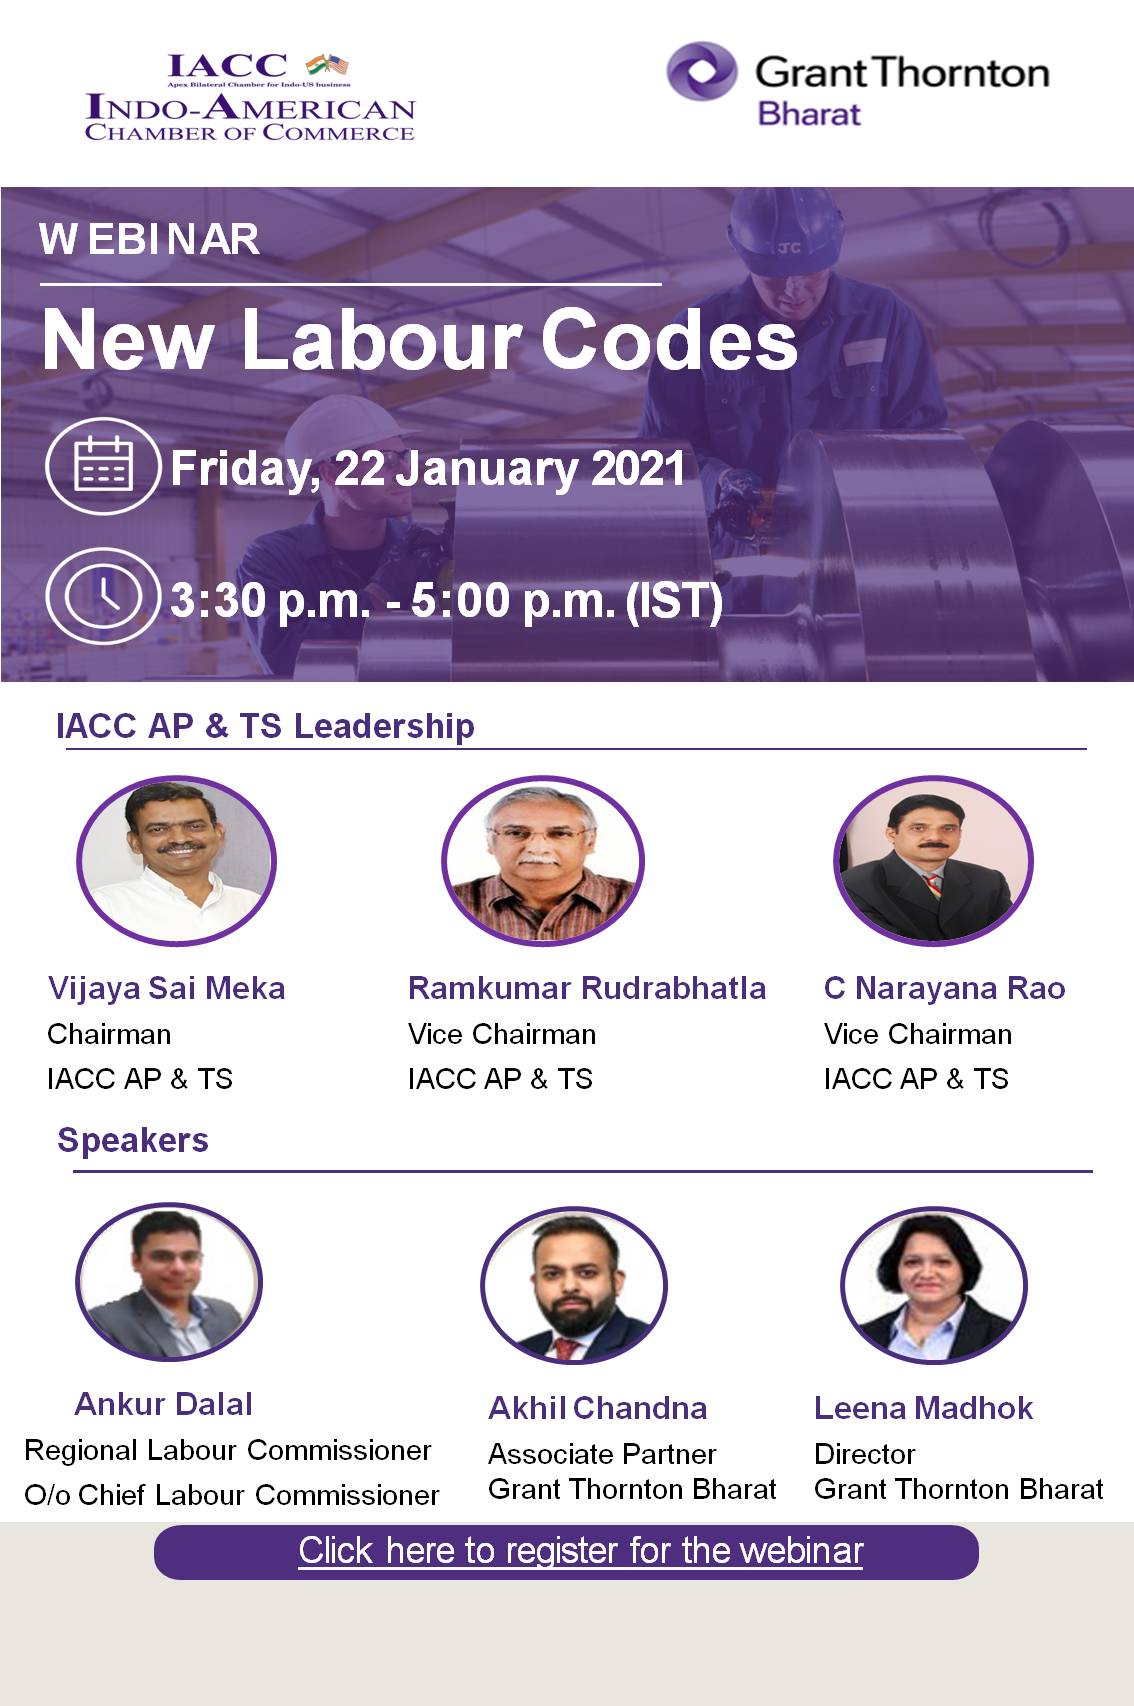 IACC and Grant Thornton Bharat Webinar “New Labour Codes” Indo